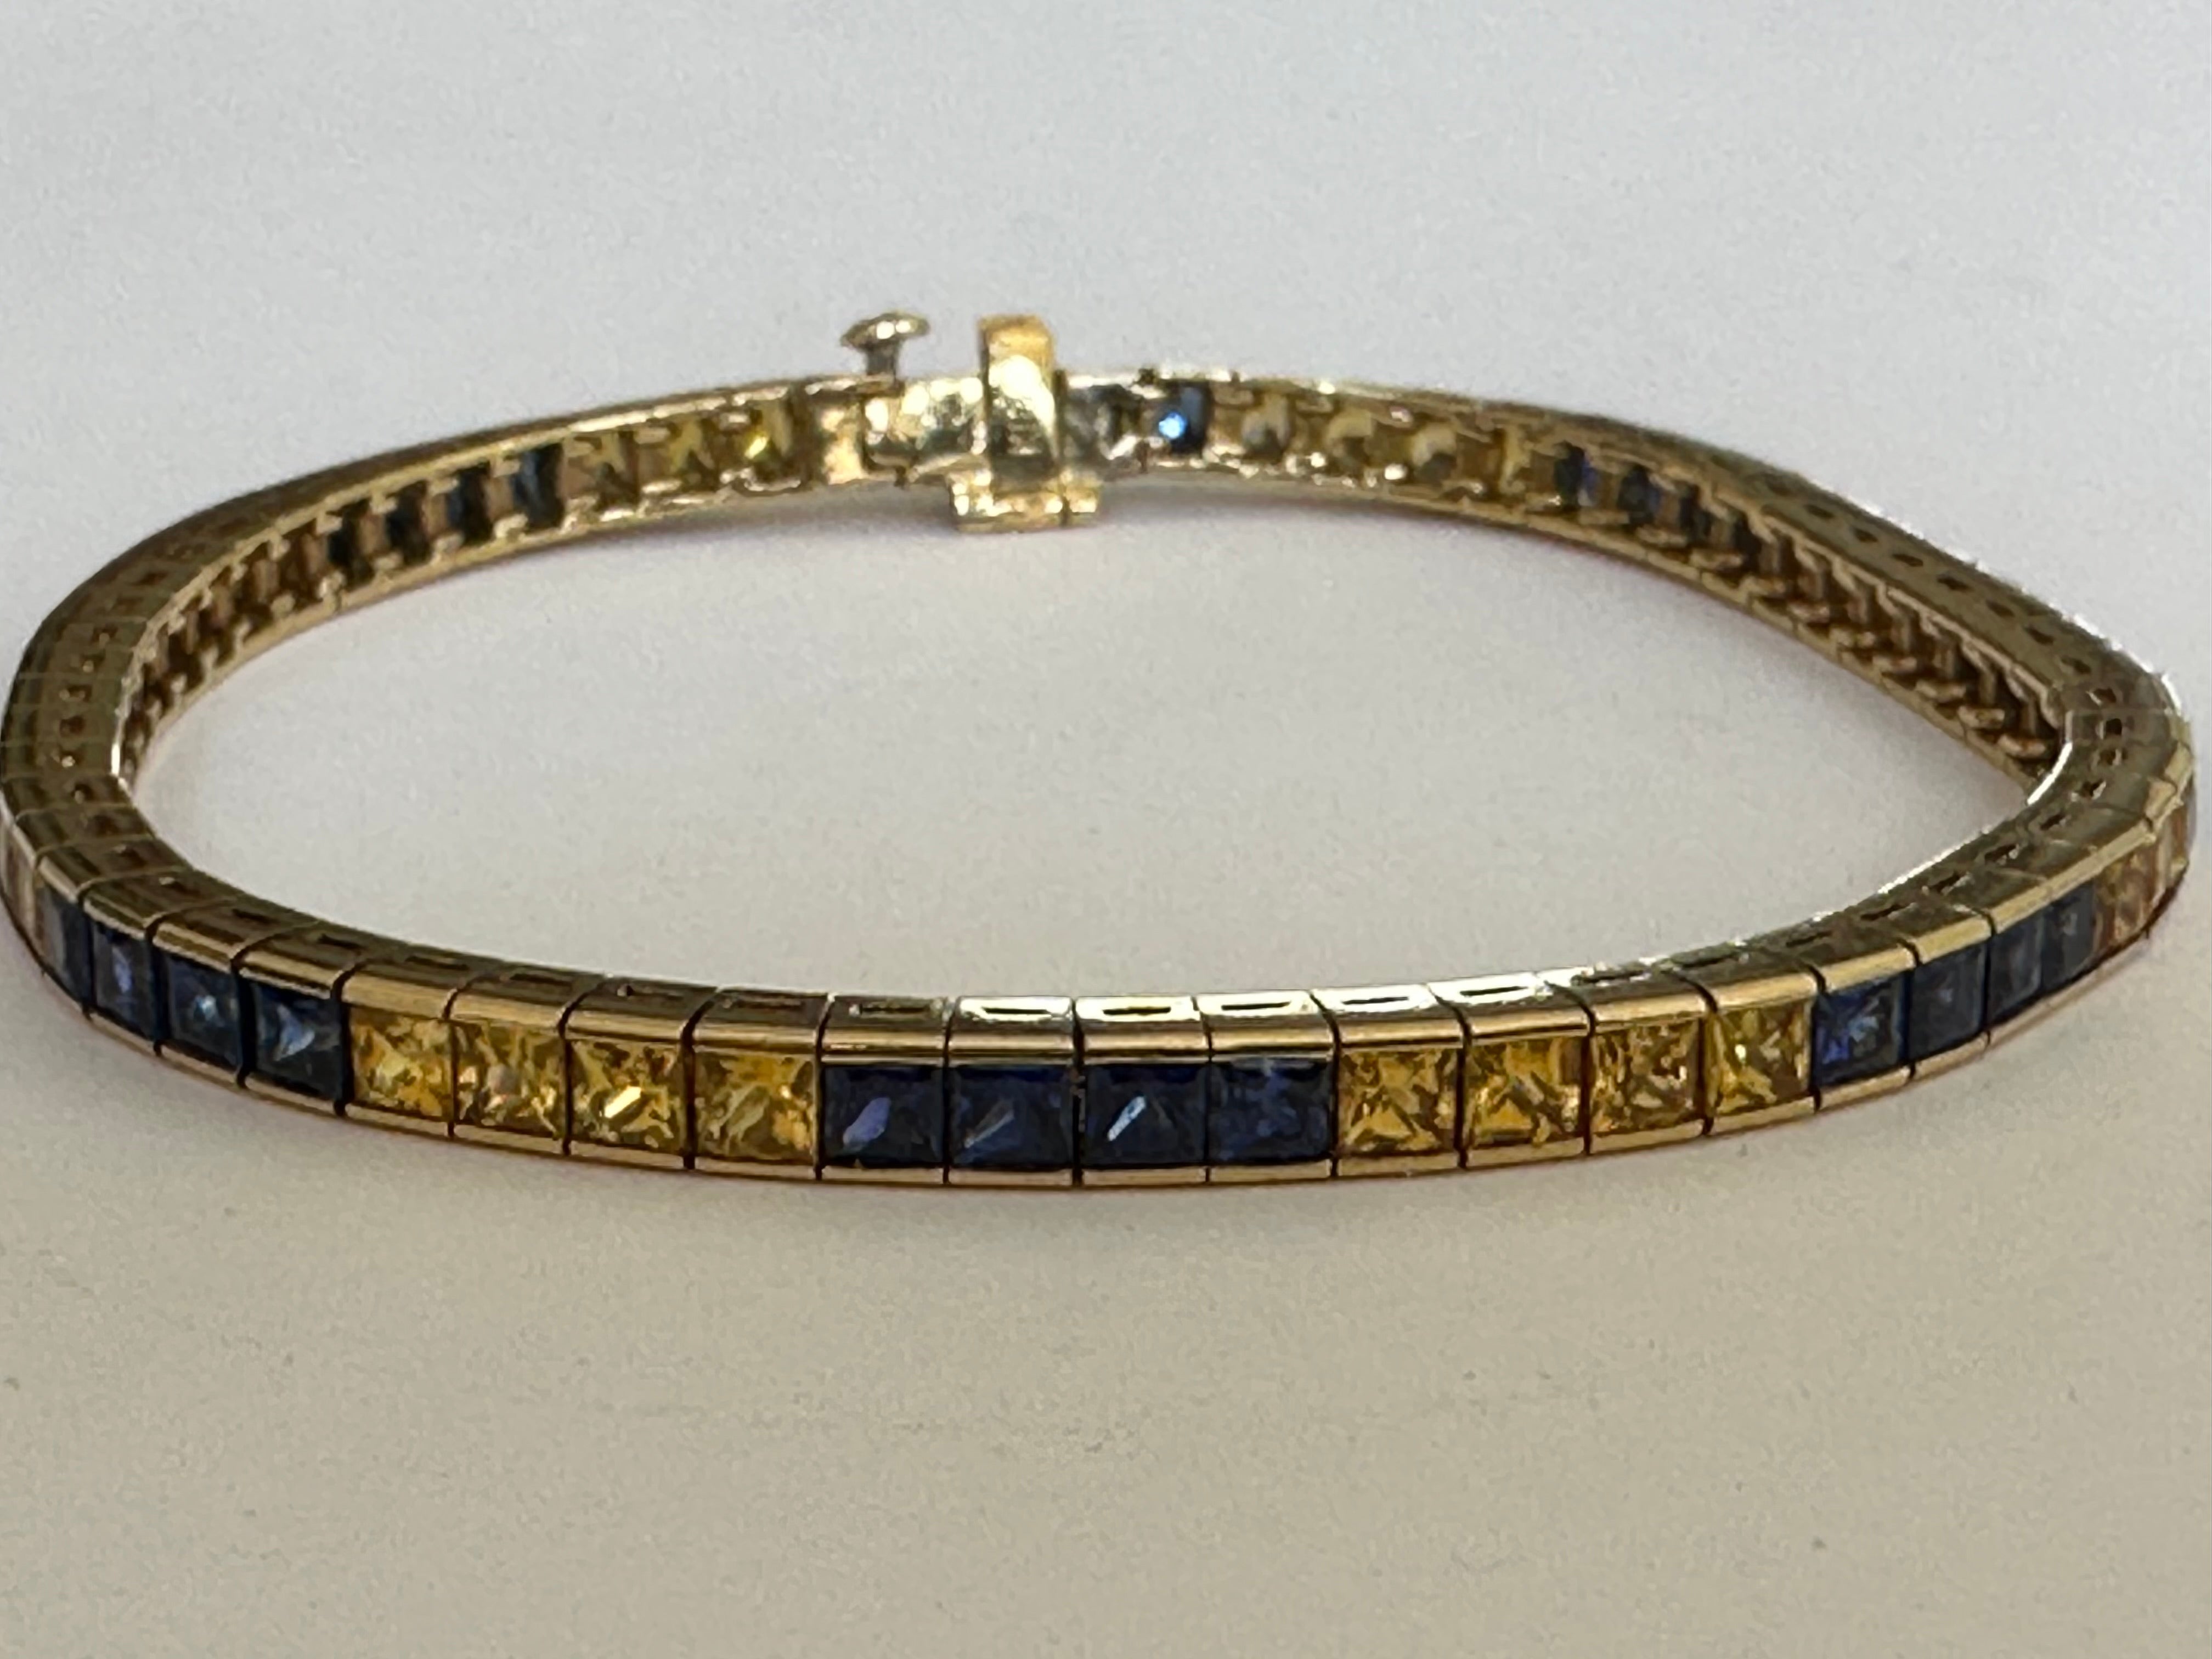 Crafted in 18k yellow gold, this stunning estate link bracelet features alternating rows of natural blue and yellow square cut sapphires totaling approximately 7.50 carats. The bracelet measures 7 inches. 